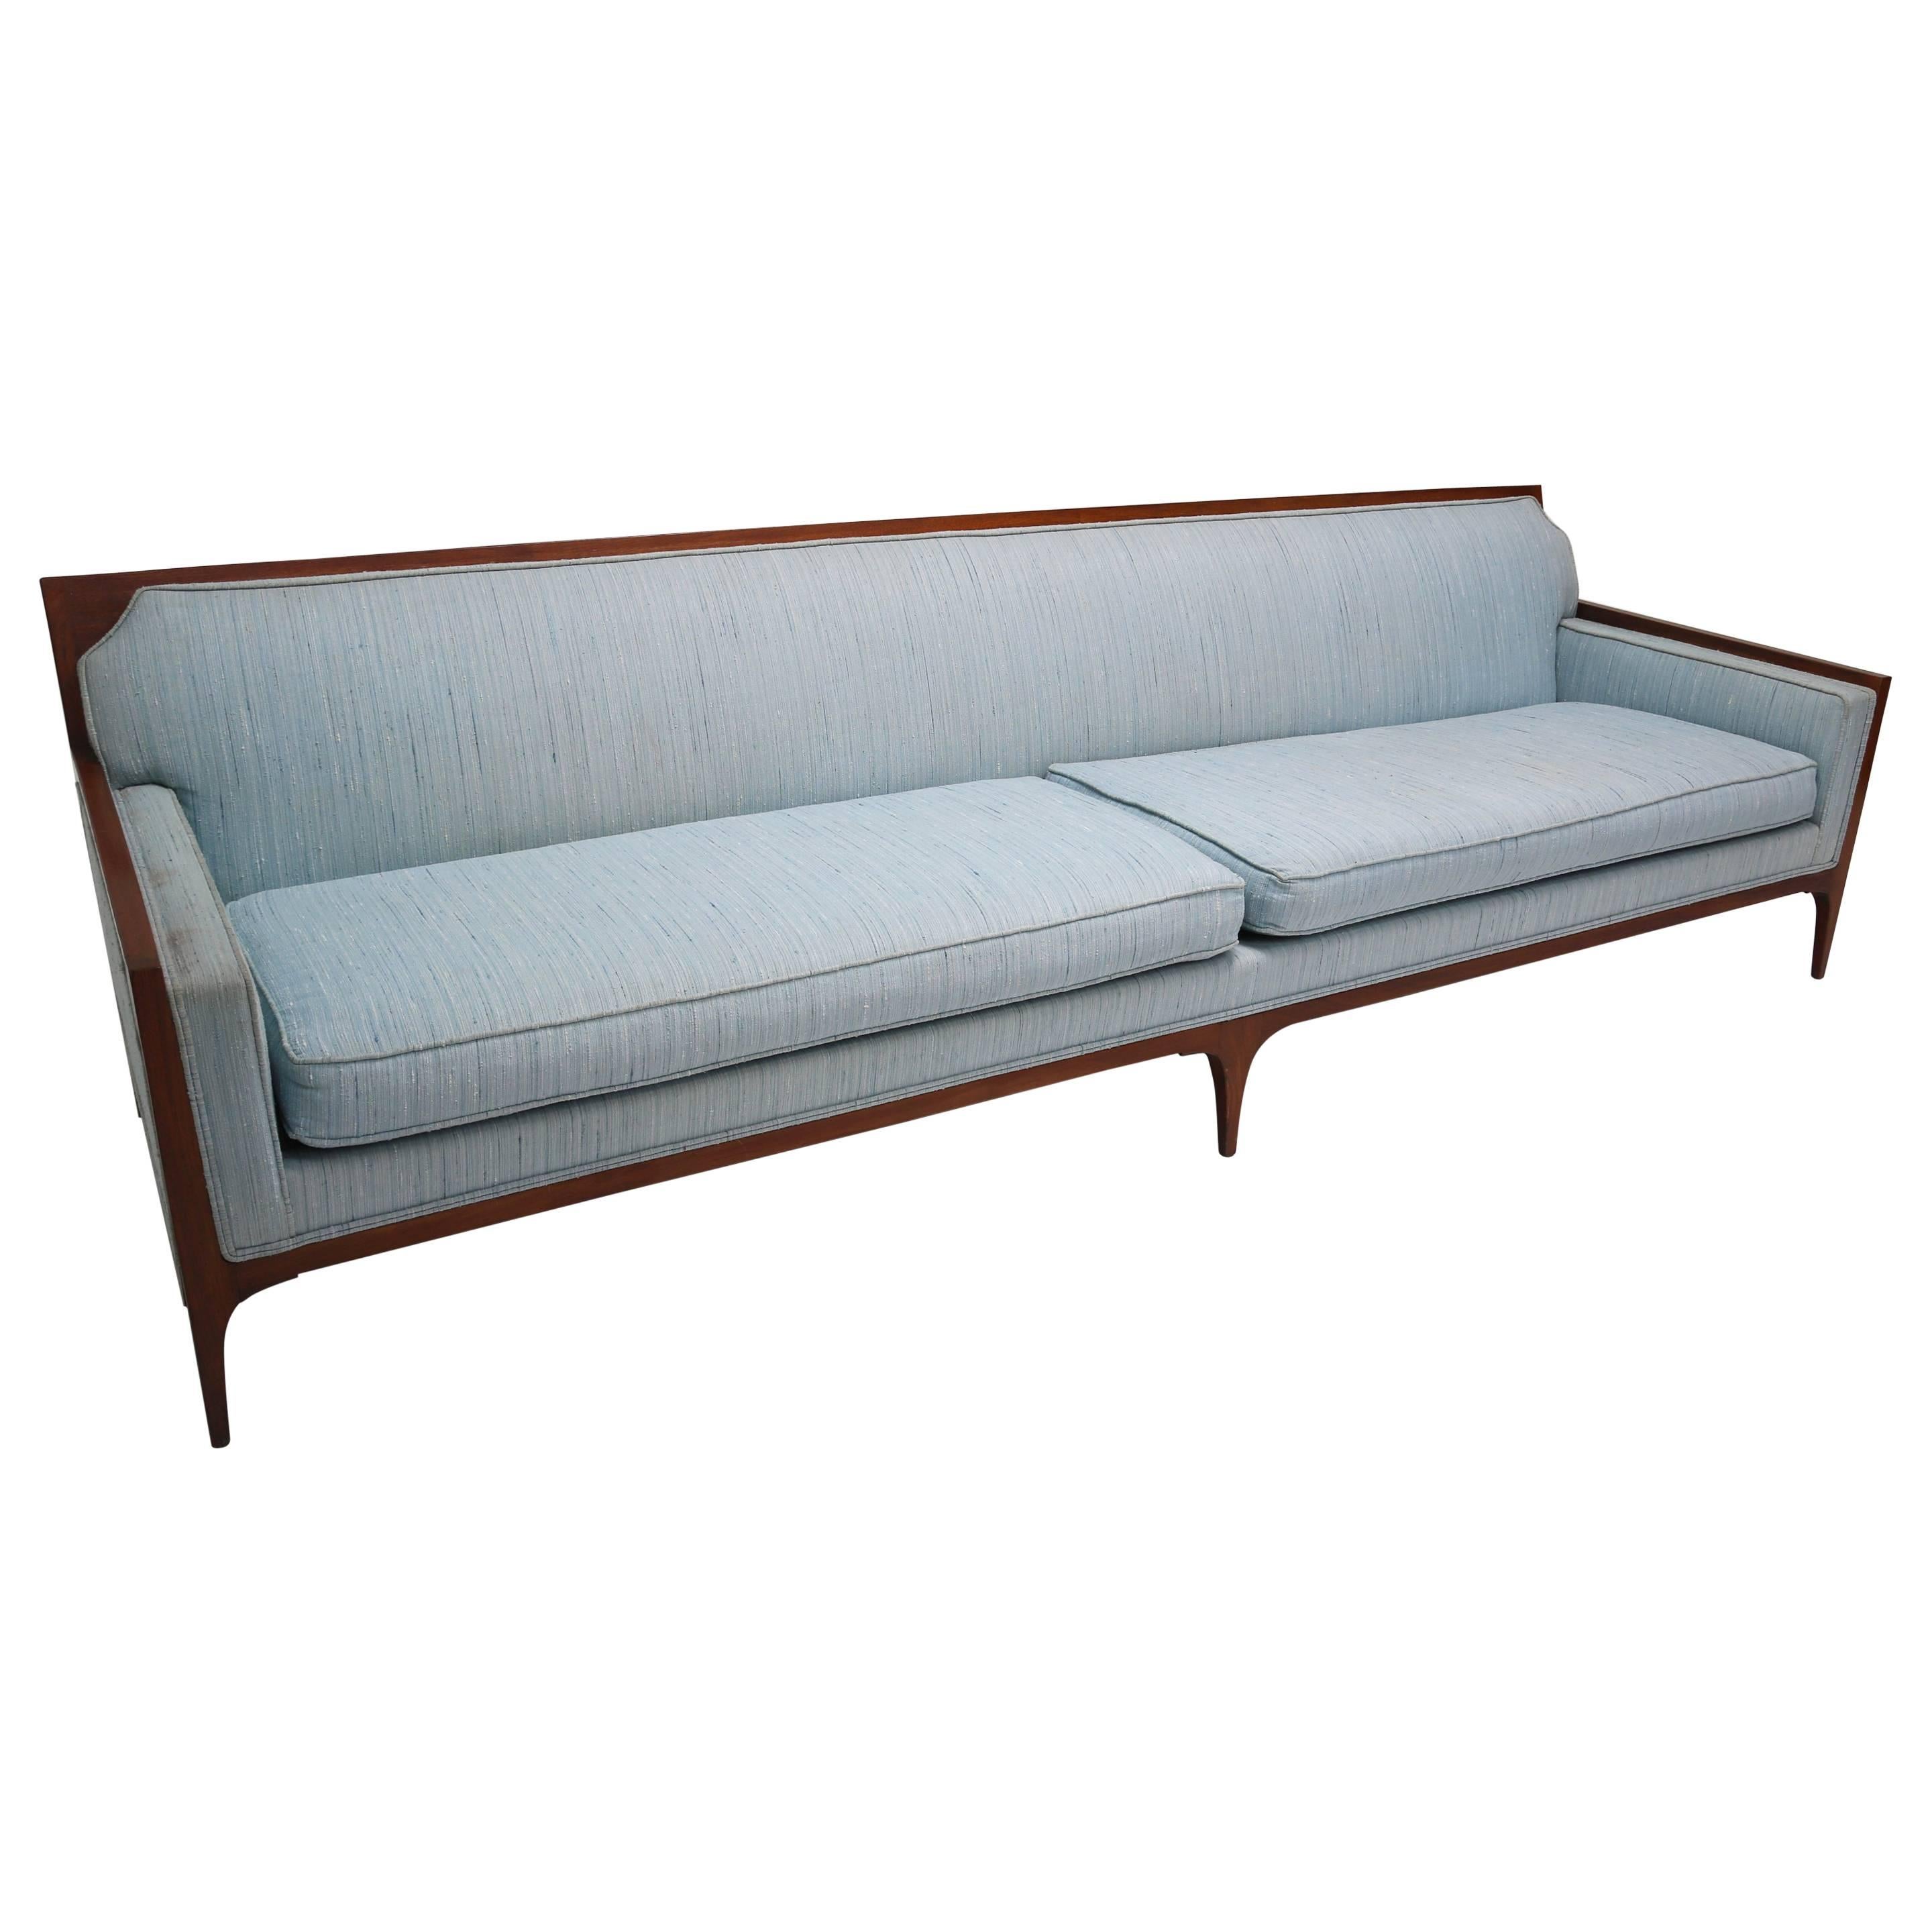 Mid-century Sofa in the style of Paul McCobb